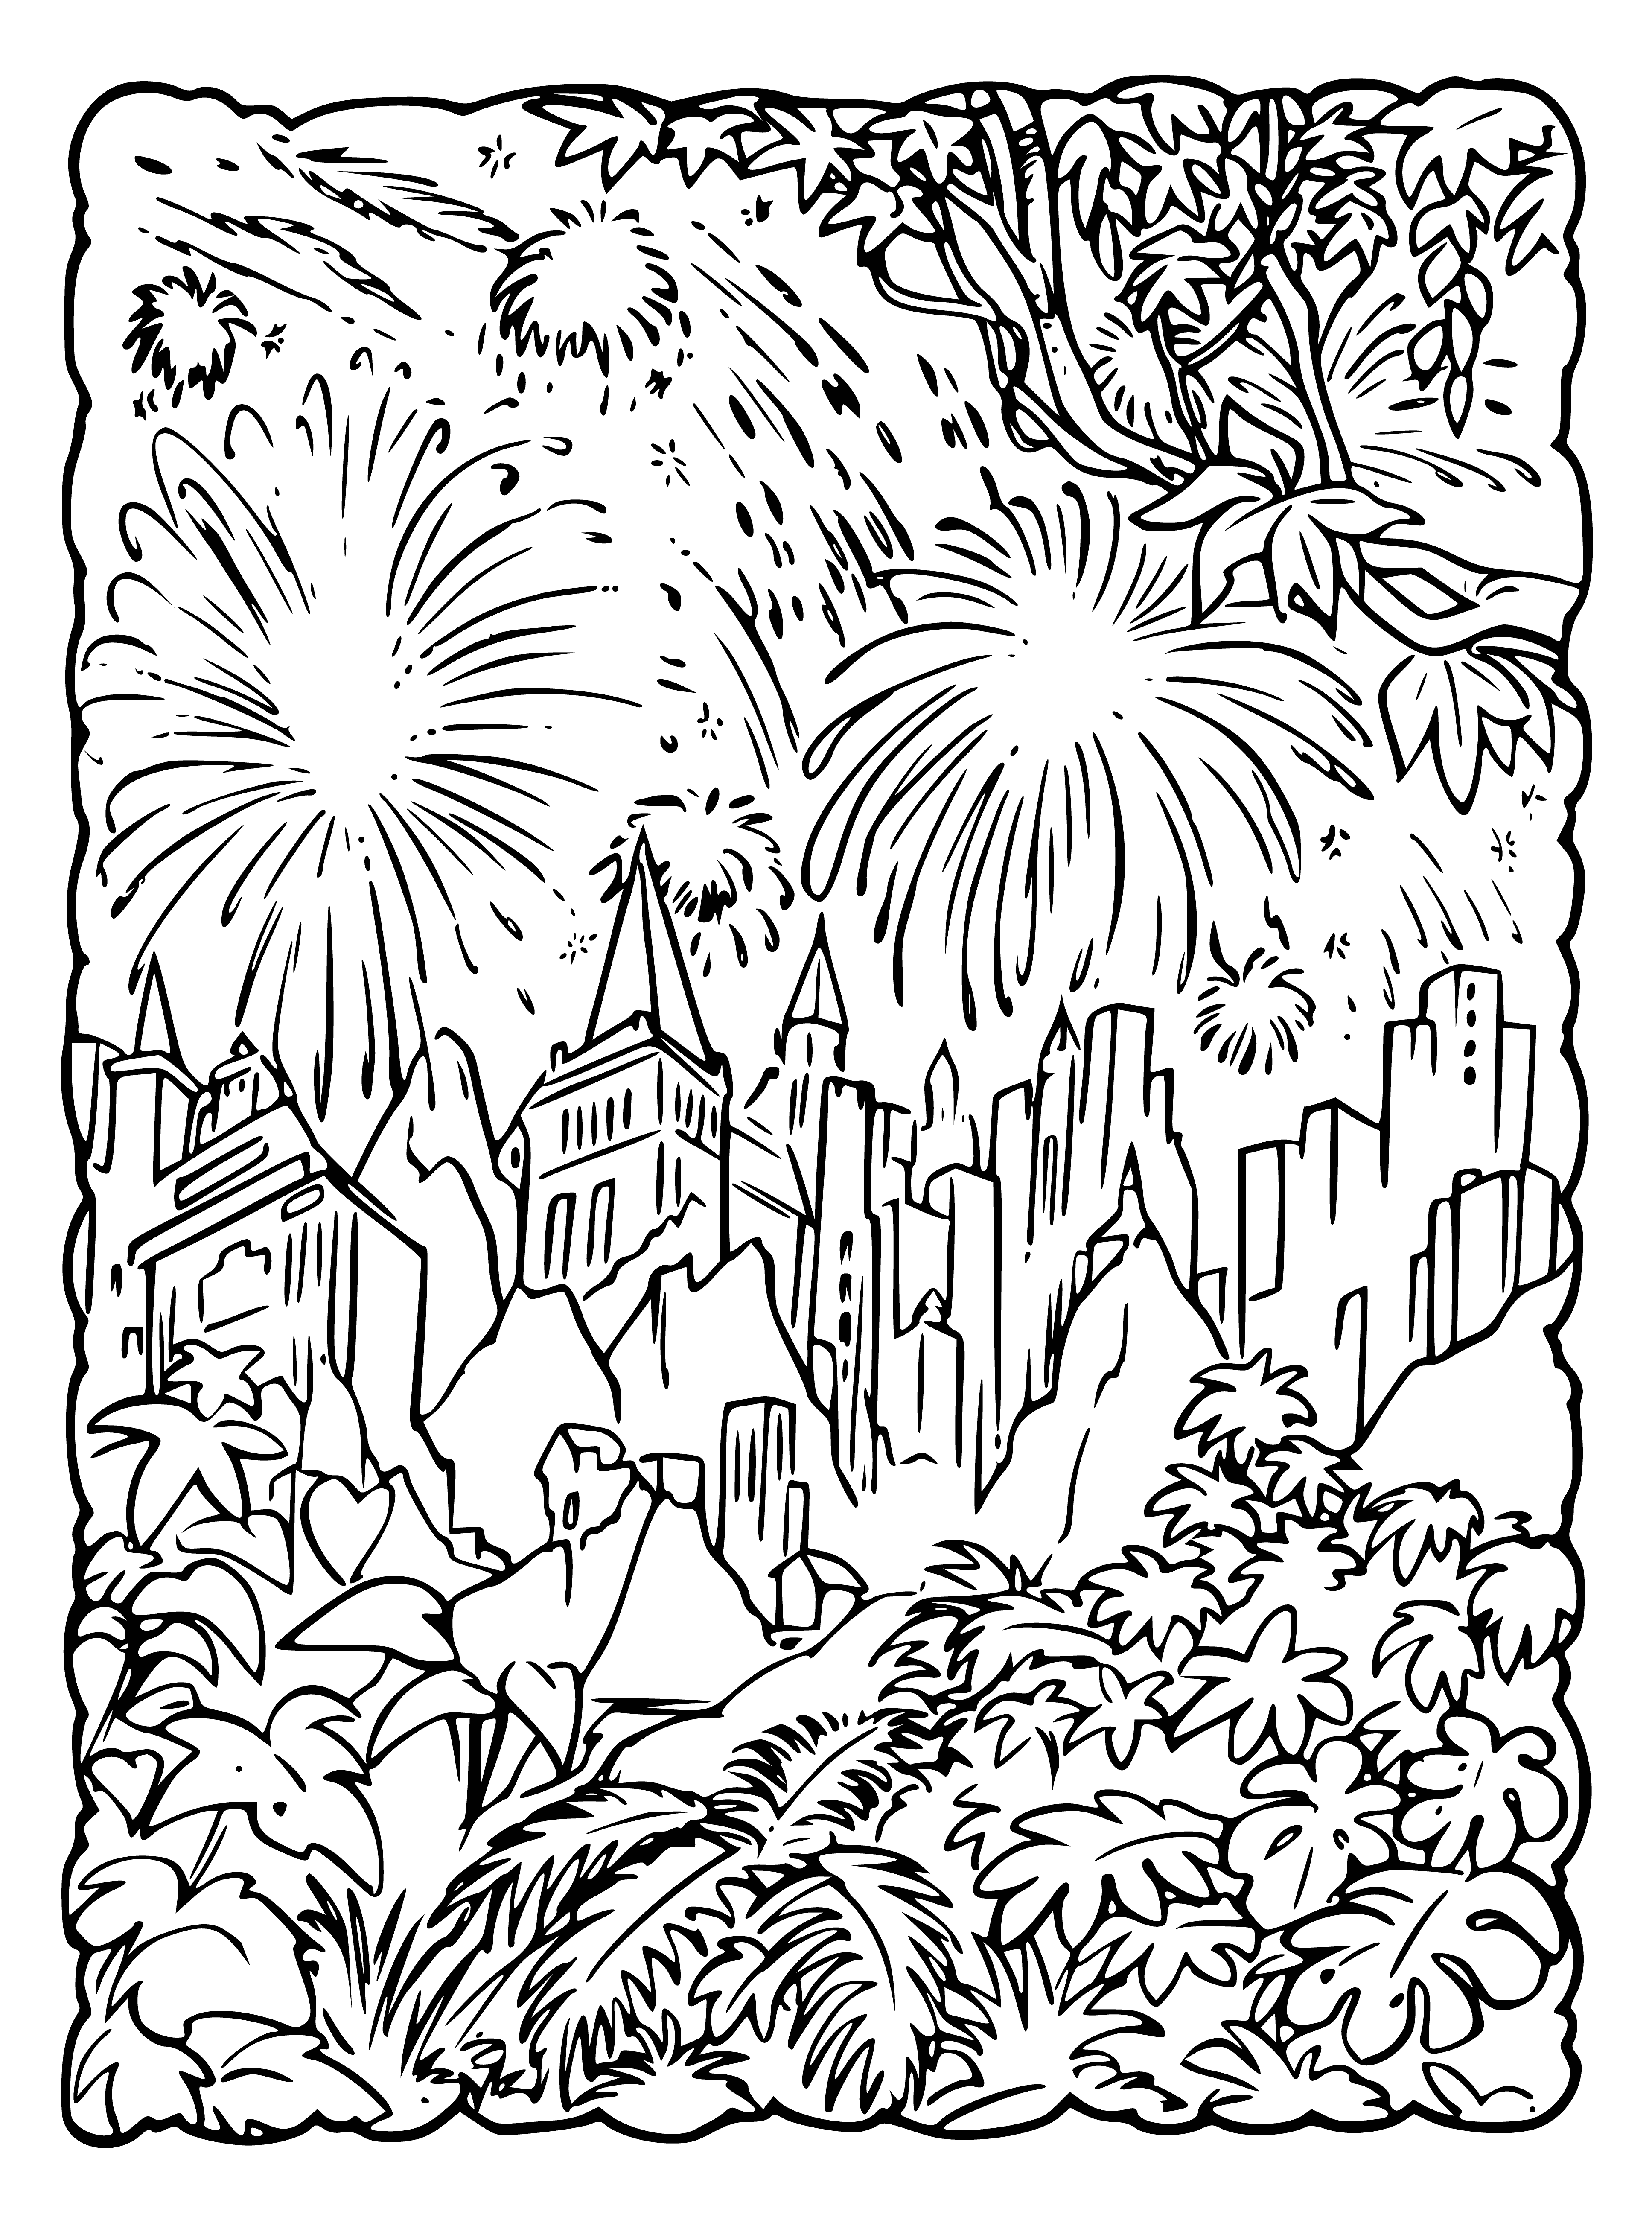 Fireworks over the city coloring page